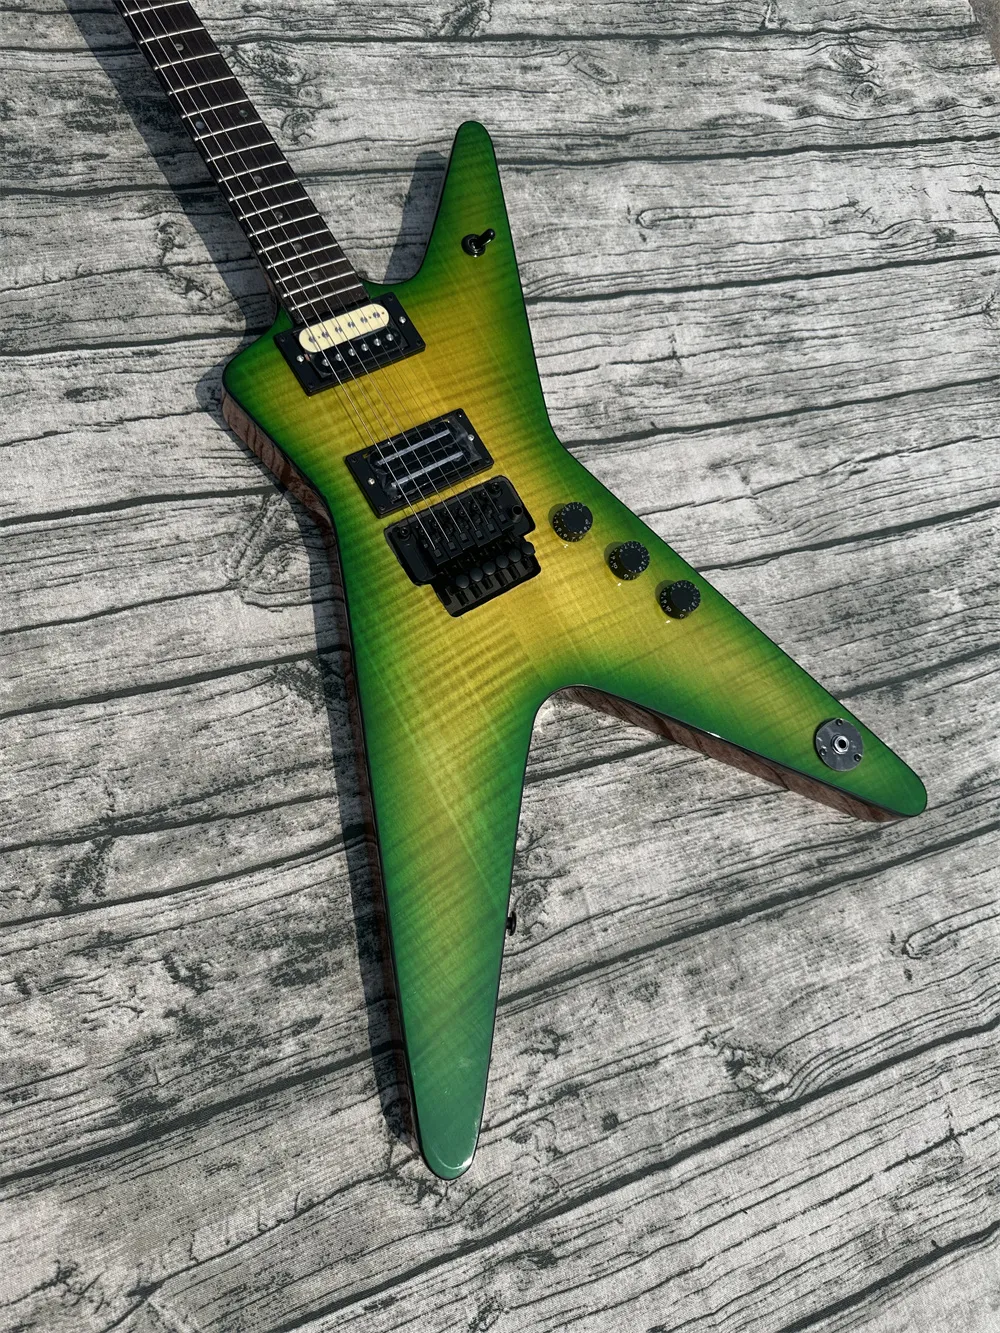 Irregular electric guitar, black double shake, imported wood and paint, green tiger pattern, bright light, in stock, fast shipping